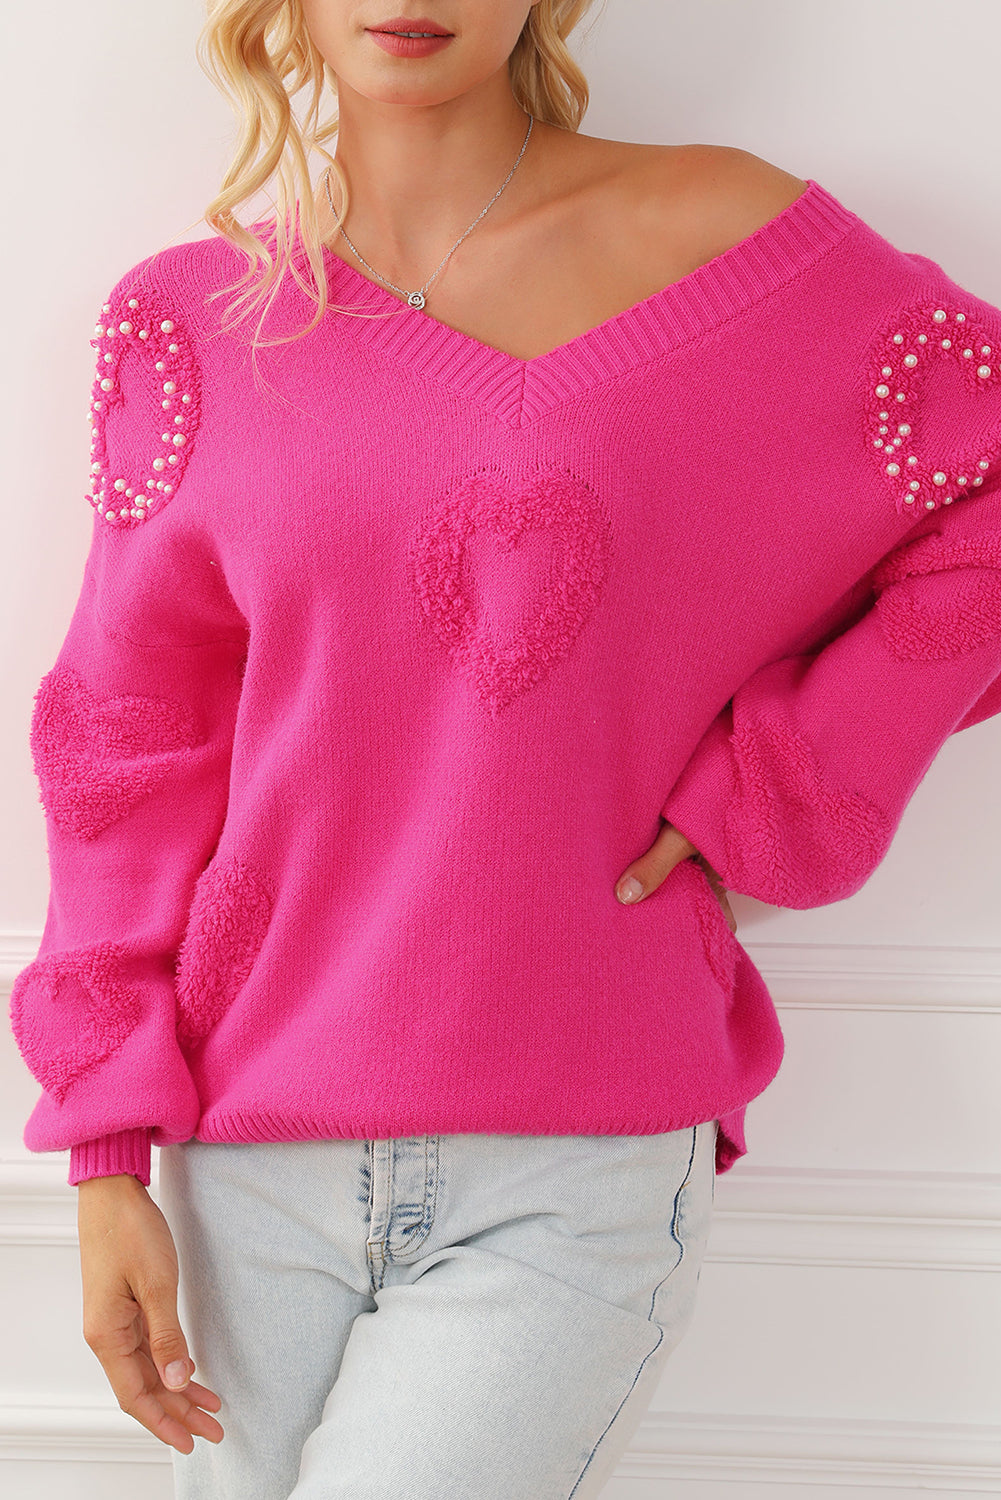 Rose red pearl embellished fuzzy hearts v neck sweater - l / 85% viscose + 15% polyamide - sweaters & cardigans